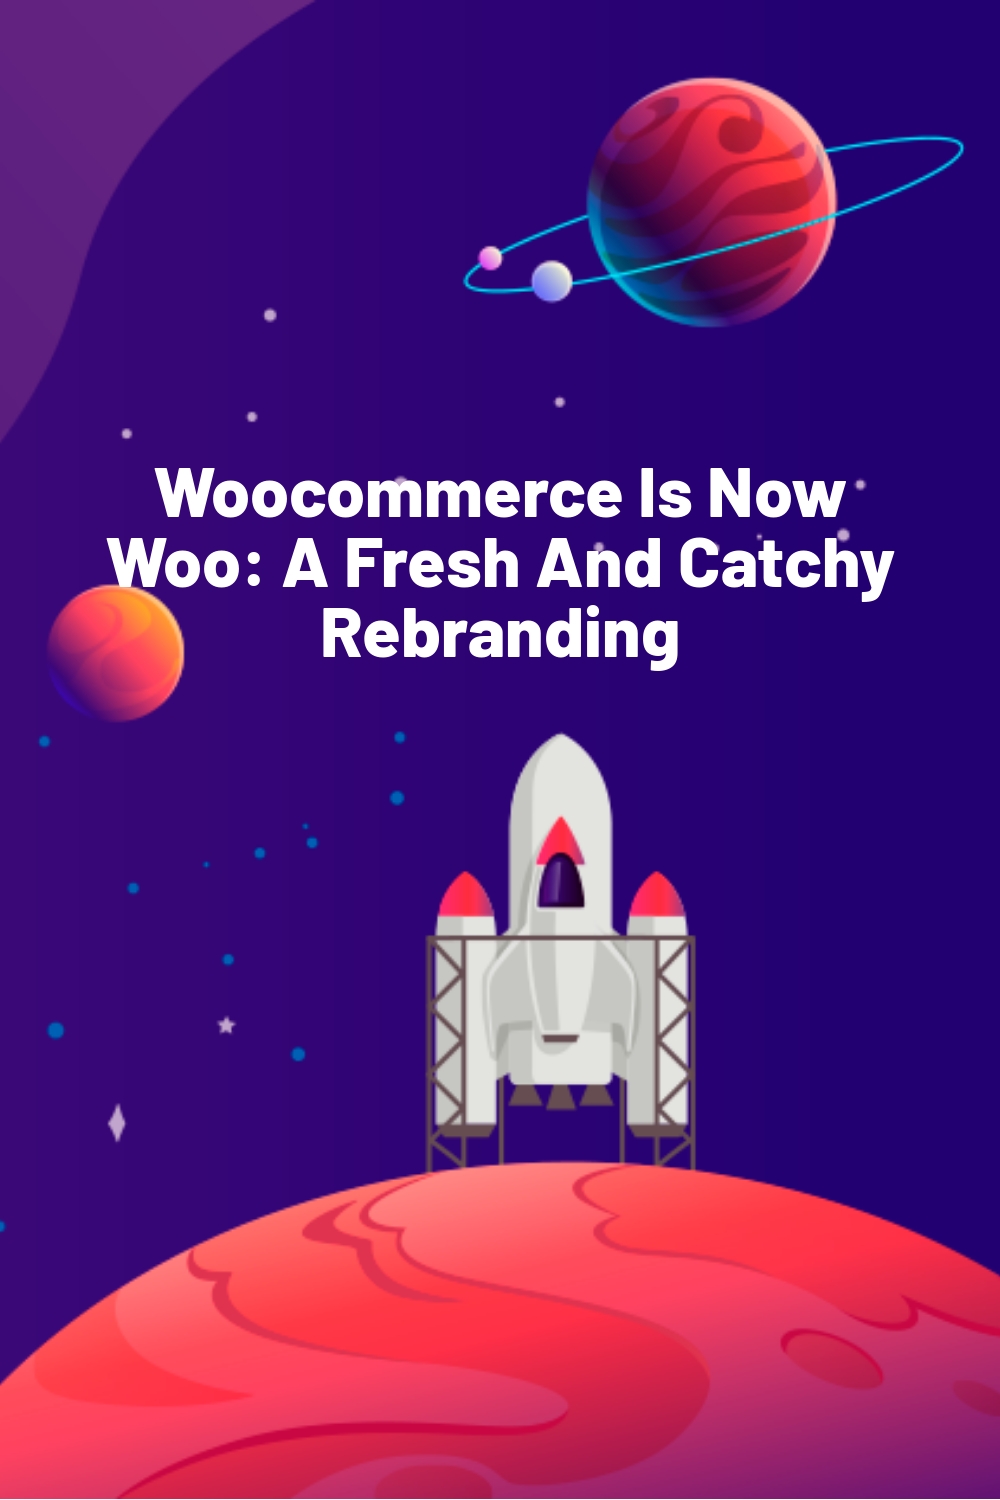 Woocommerce Is Now Woo: A Fresh And Catchy Rebranding